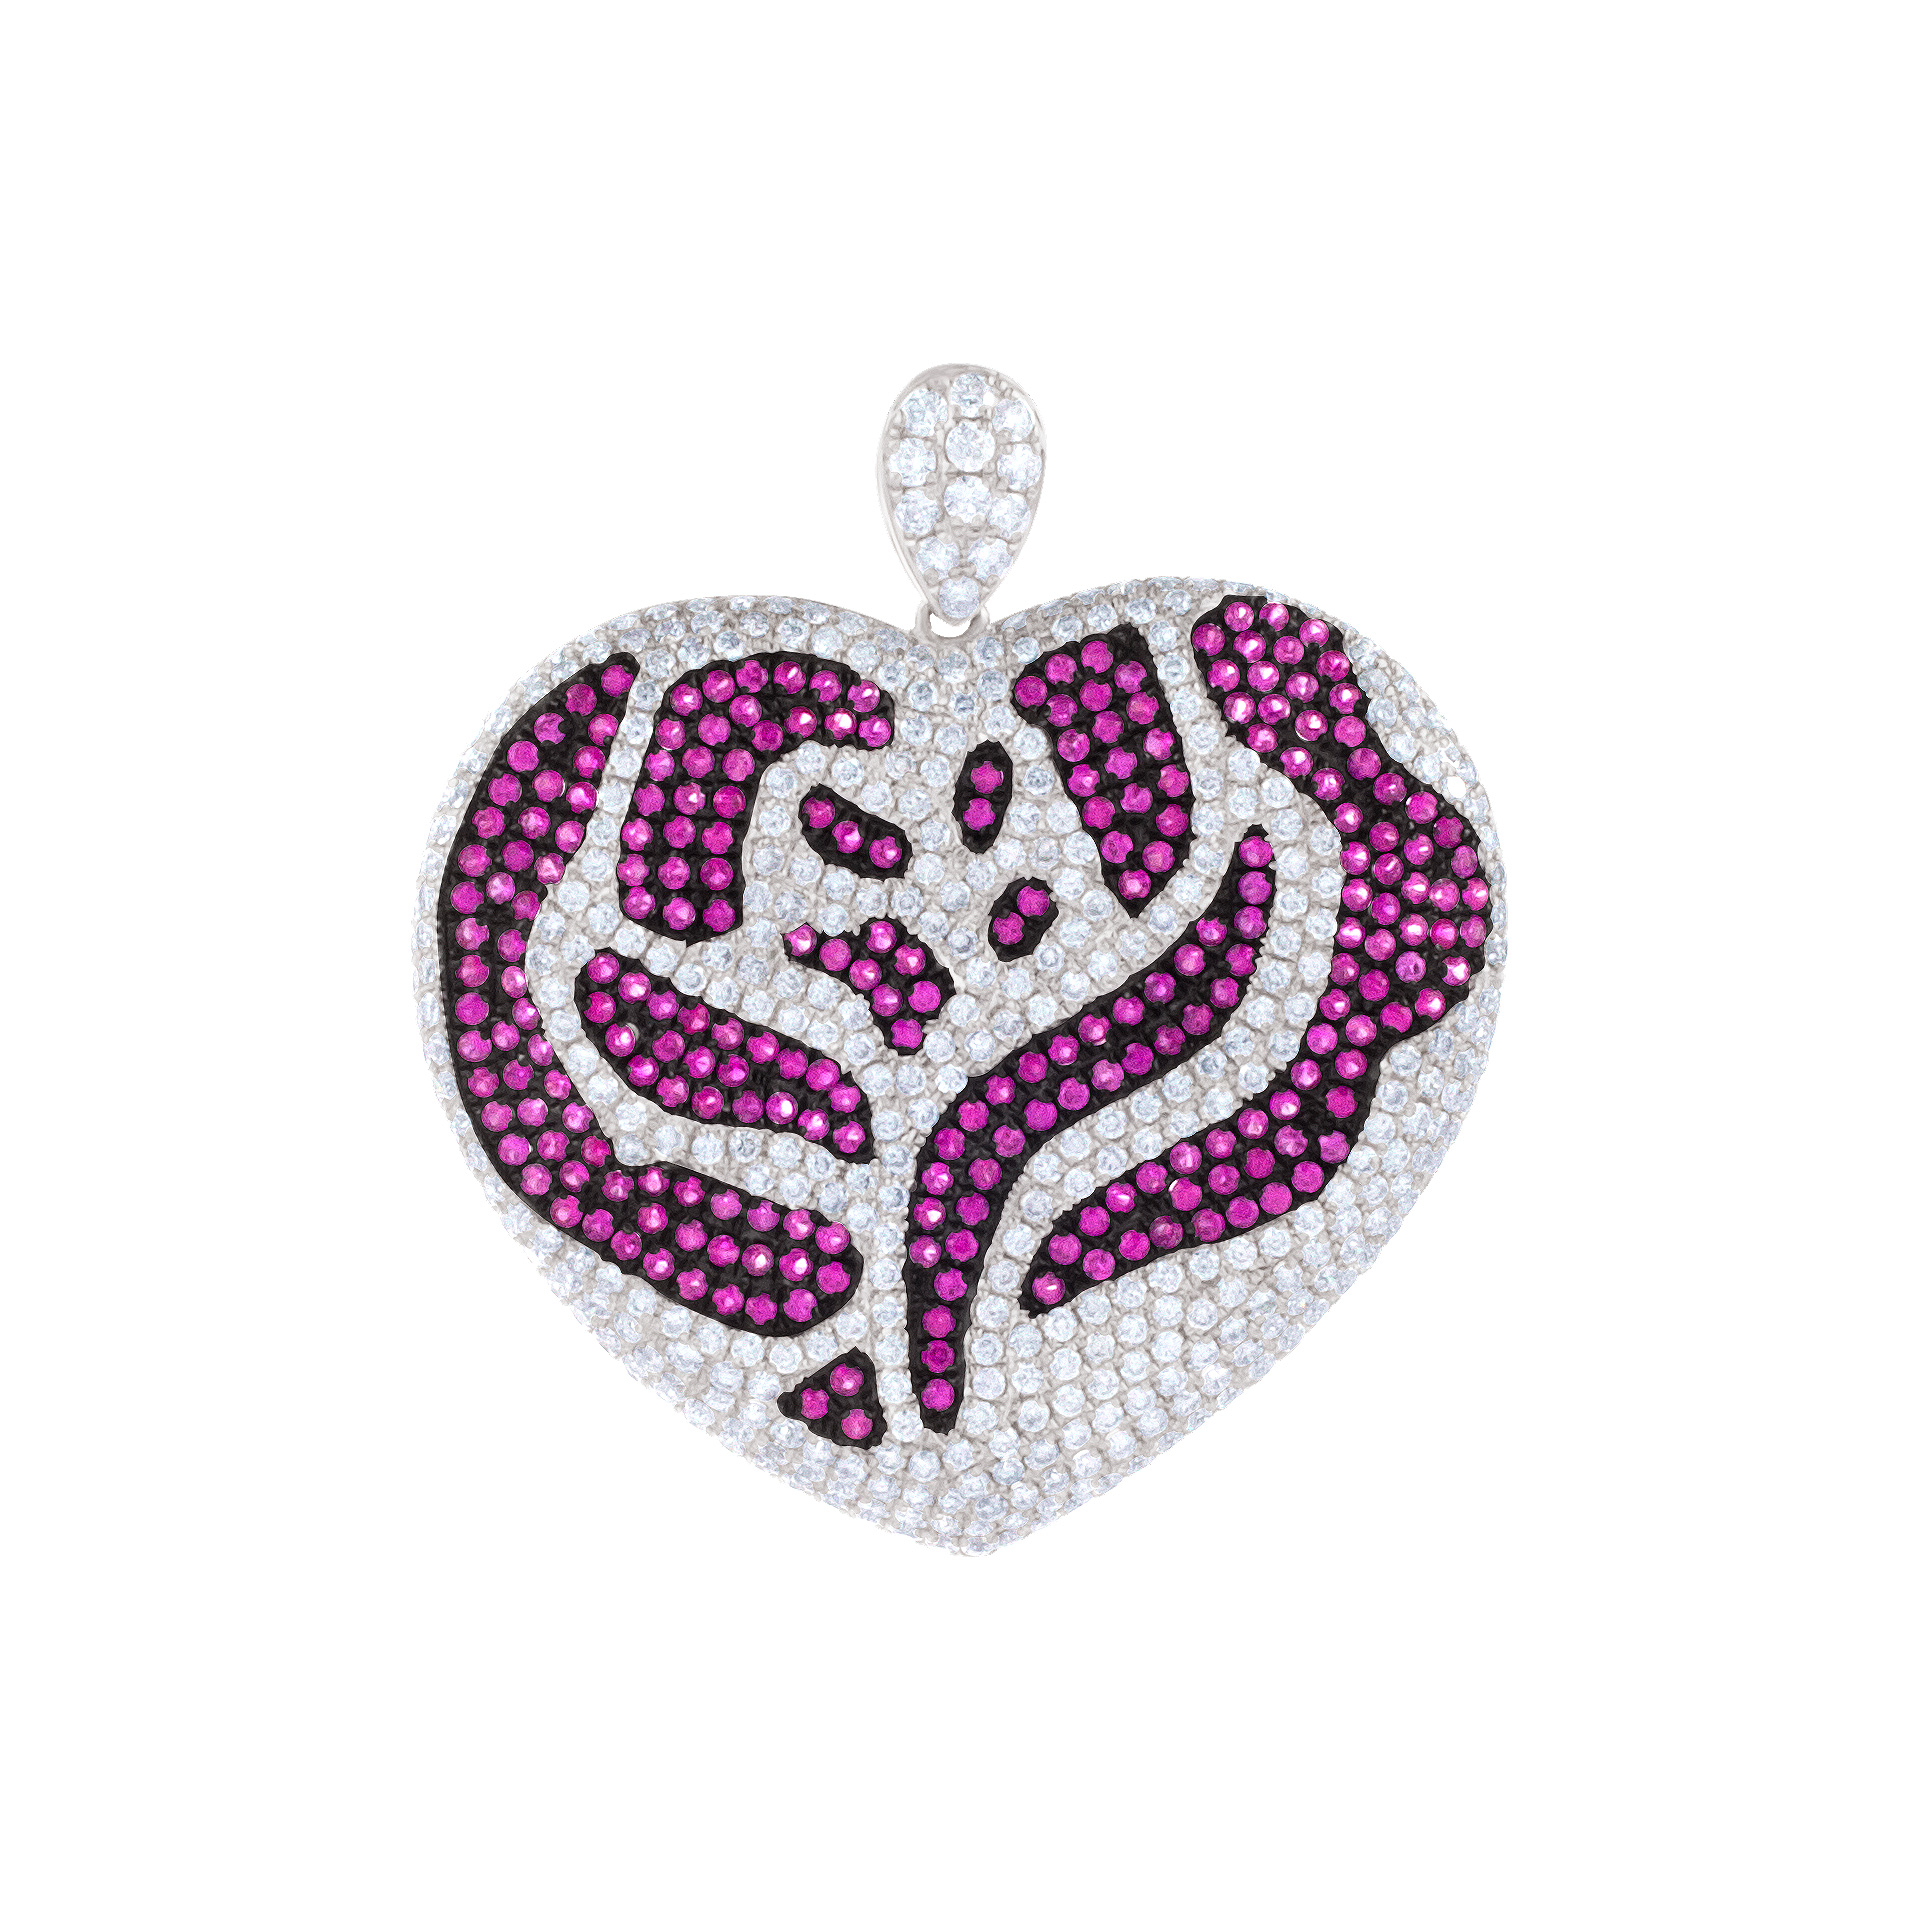 Sexy 18K white gold pendant with rubies and diamonds. 3.51cts in diamonds